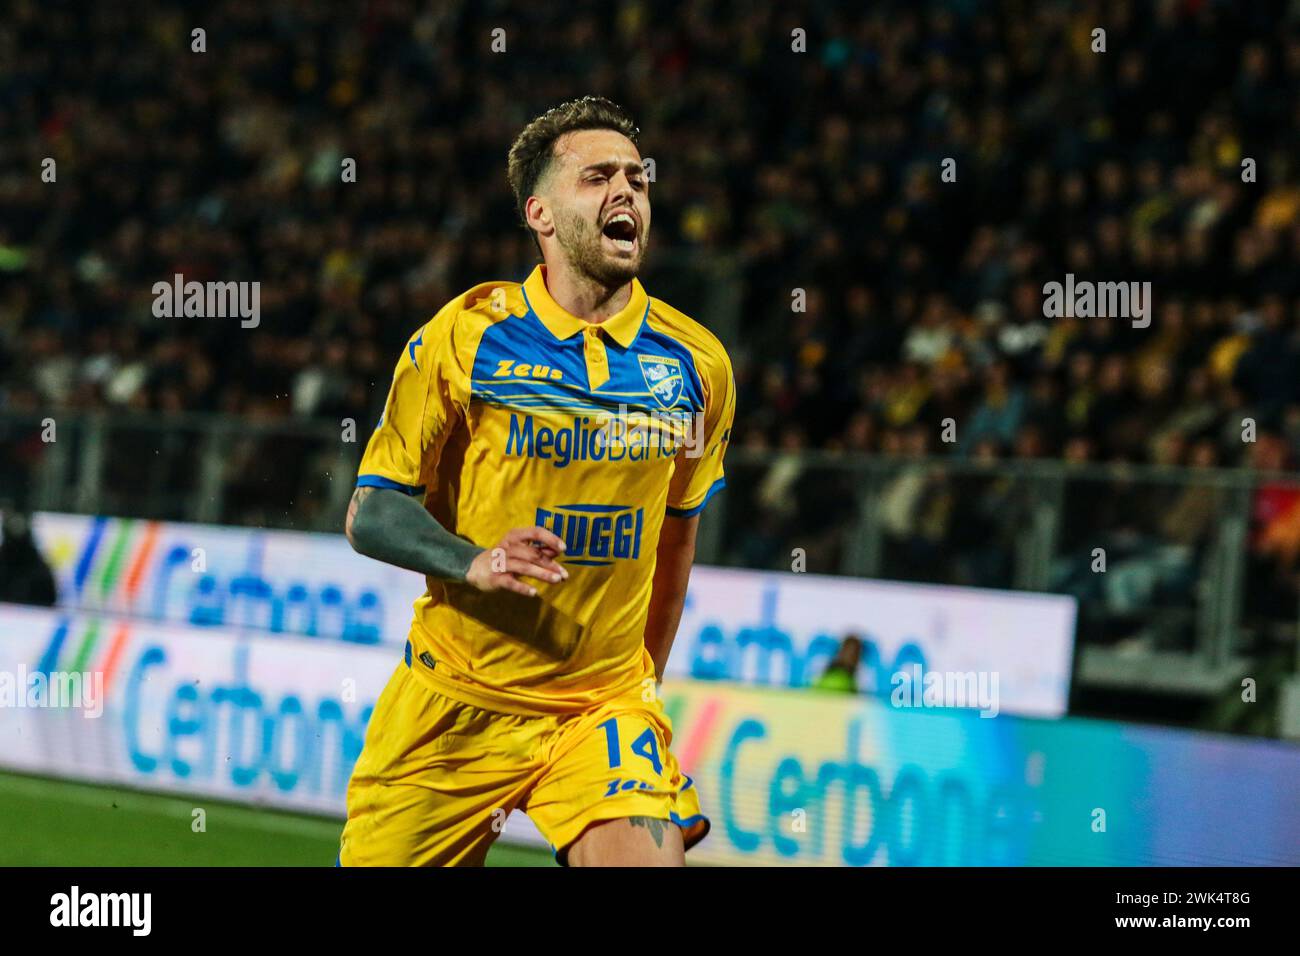 Frosinone, Italy. 18th Feb, 2024. Francesco Gelli of Frosinone Calcio during Frosinone Calcio vs AS Roma, Italian soccer Serie A match in Frosinone, Italy, February 18 2024 Credit: Independent Photo Agency/Alamy Live News Stock Photo